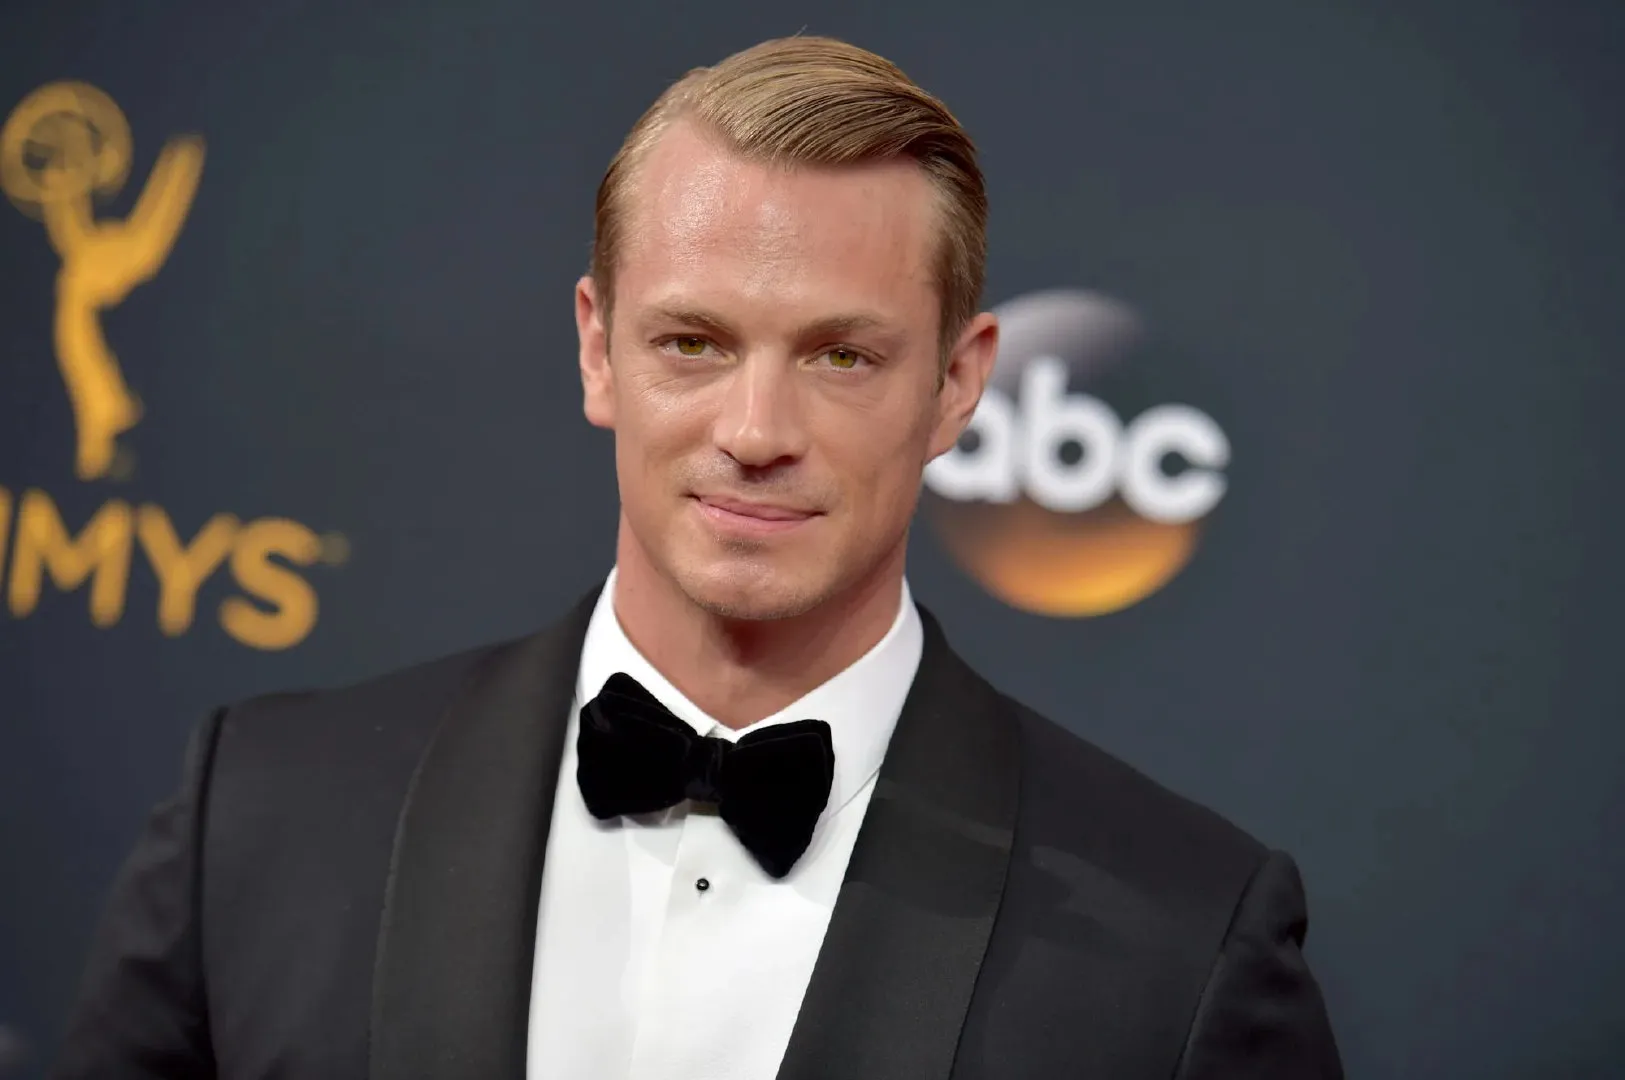 Joel Kinnaman to star in crime action thriller 'The Silent Hour' | FMV6